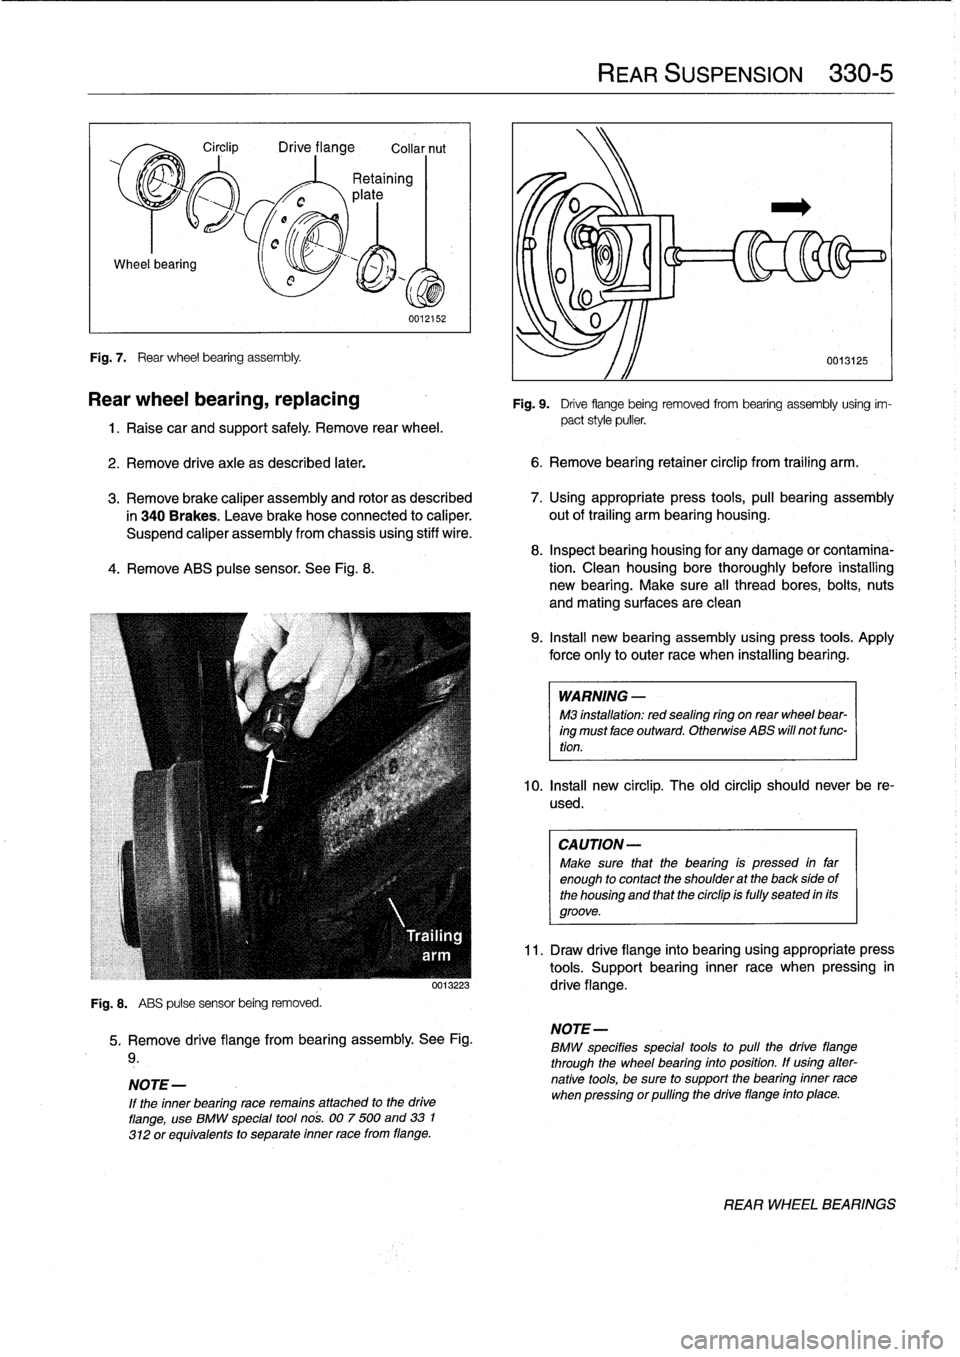 BMW 323i 1993 E36 Owners Guide Wheel
bearing

Fig
.
7
.

	

Rear
wheel
bearing
assembly
.

Circlip

	

Drive
flange

	

Collar
nut

0012152

Rear
wheel
bearing,
replacing

1
.
Raise
car
and
support
safely
.
Remove
rear
wheel
.

2
.